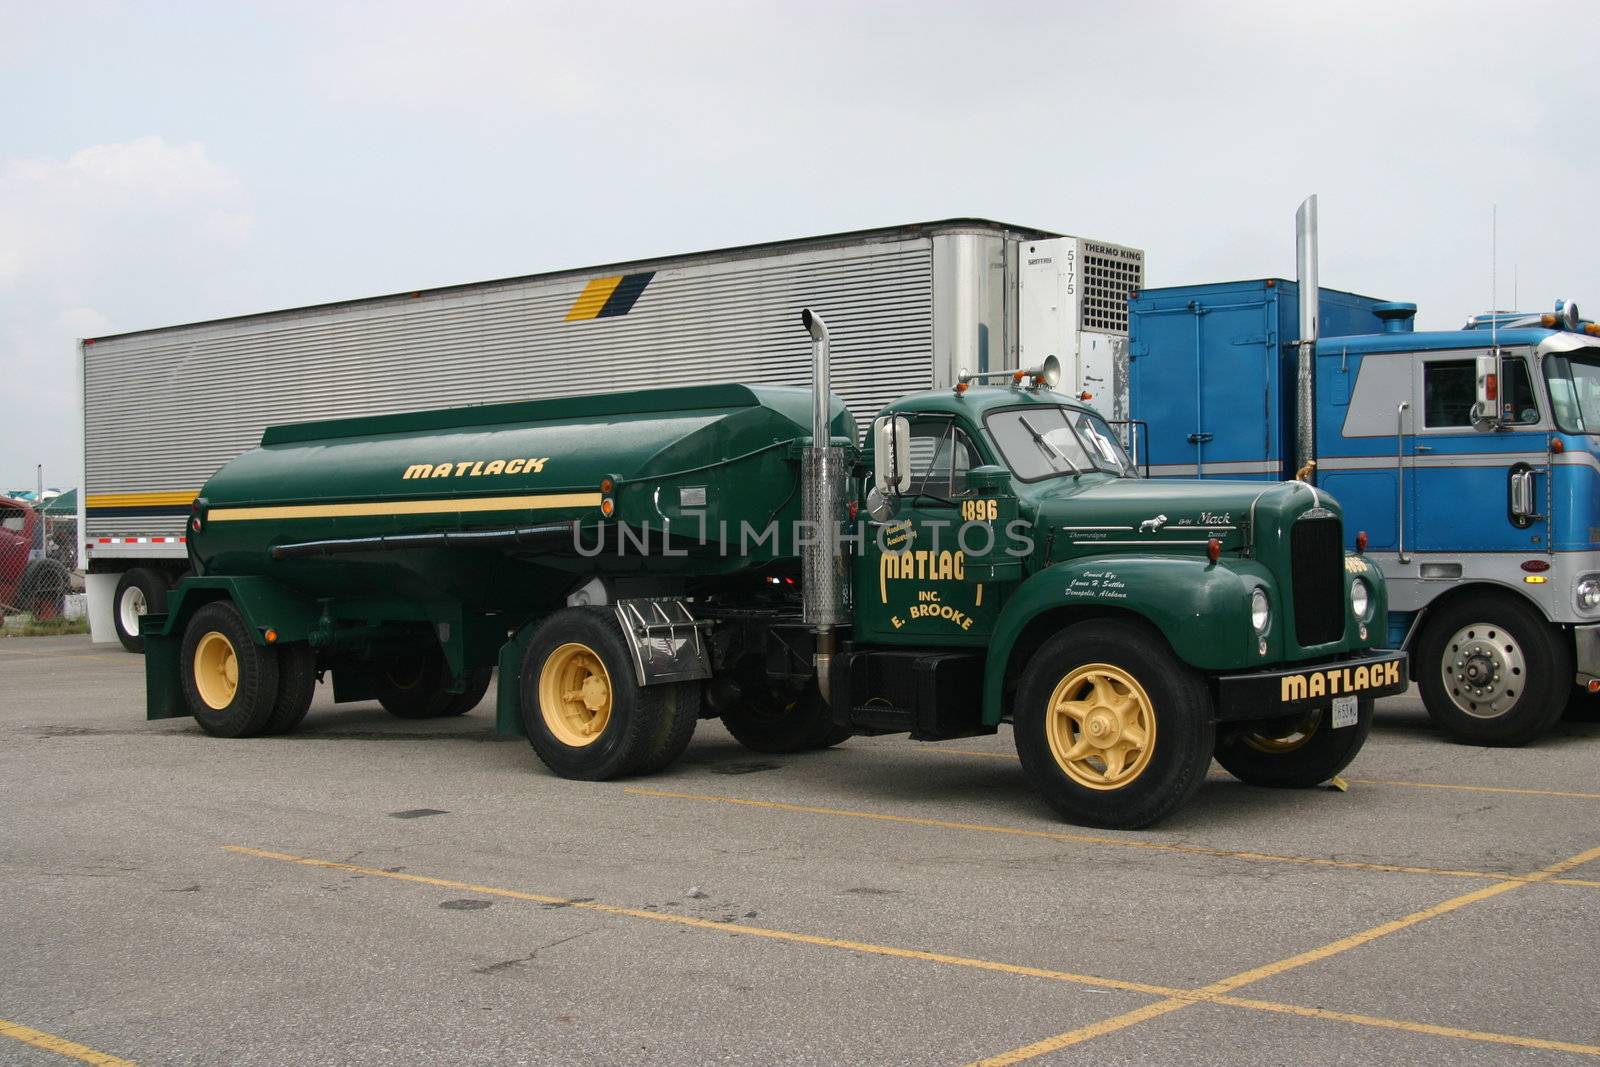 This is a dark green side view of a Matlack fuel tanker truck and trailer.